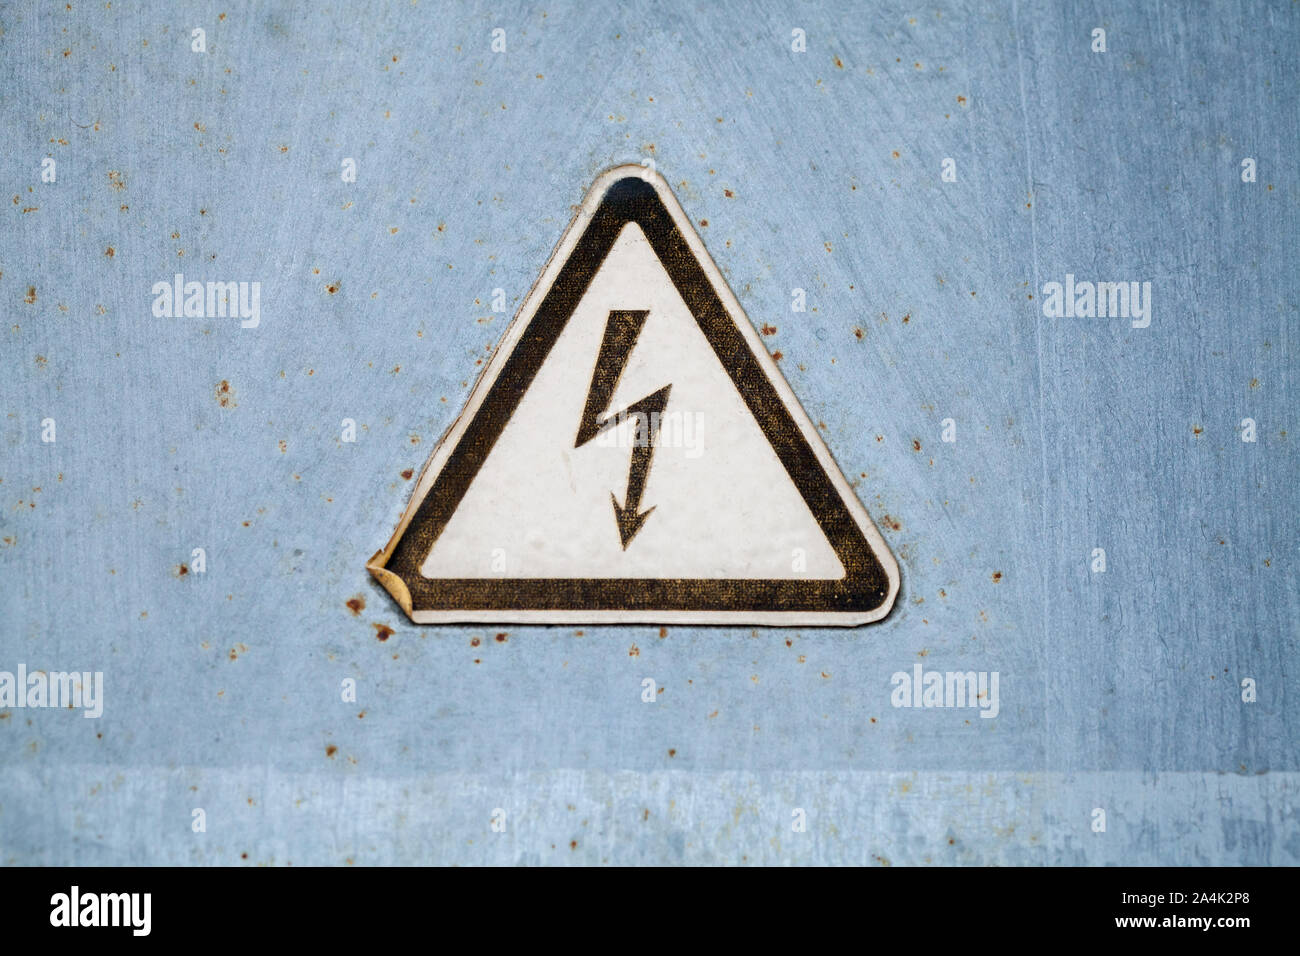 High voltage warning triangle sign mounted on grungy gray metal wall Stock Photo